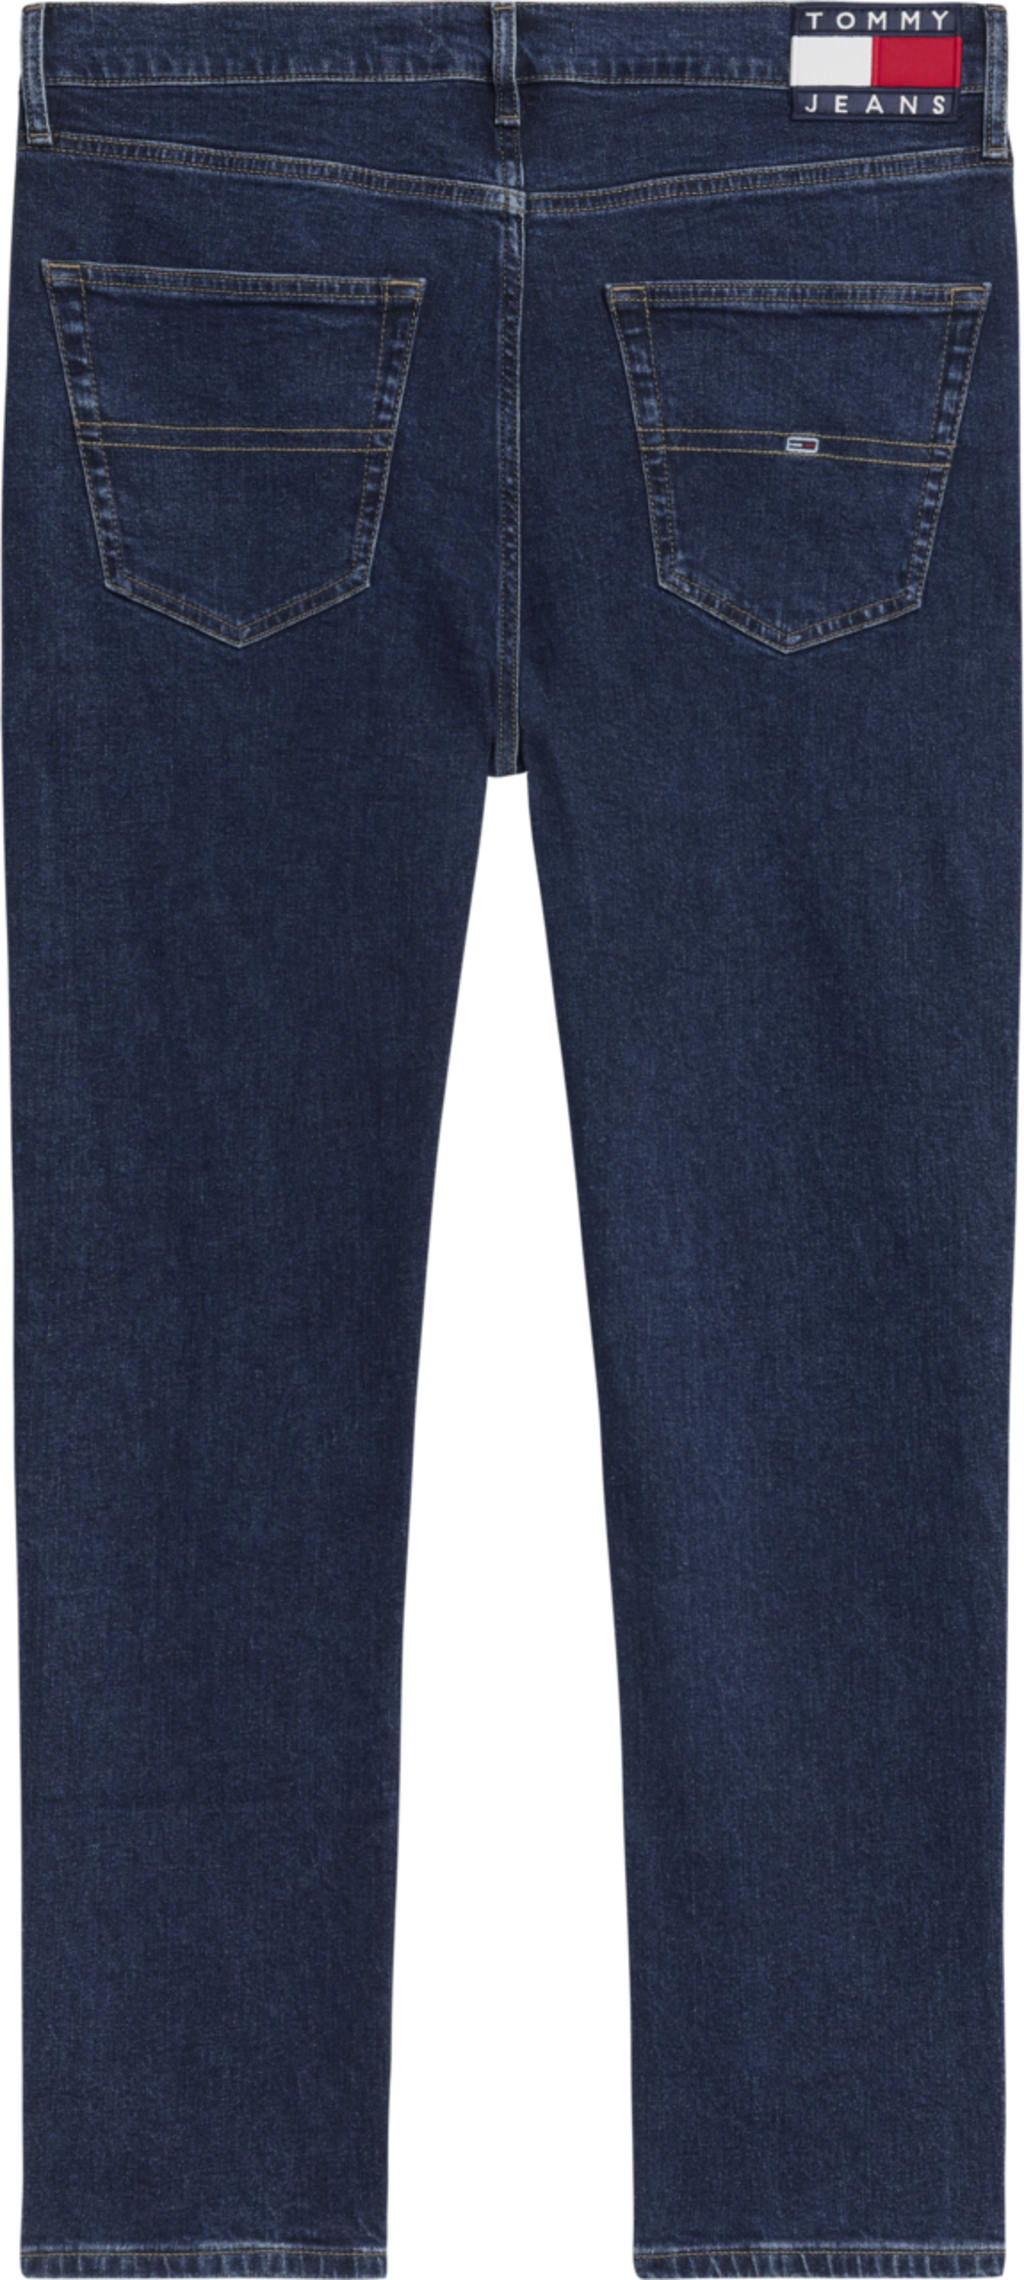 TOMMY H. DAD JEAN - JEANS SCURO